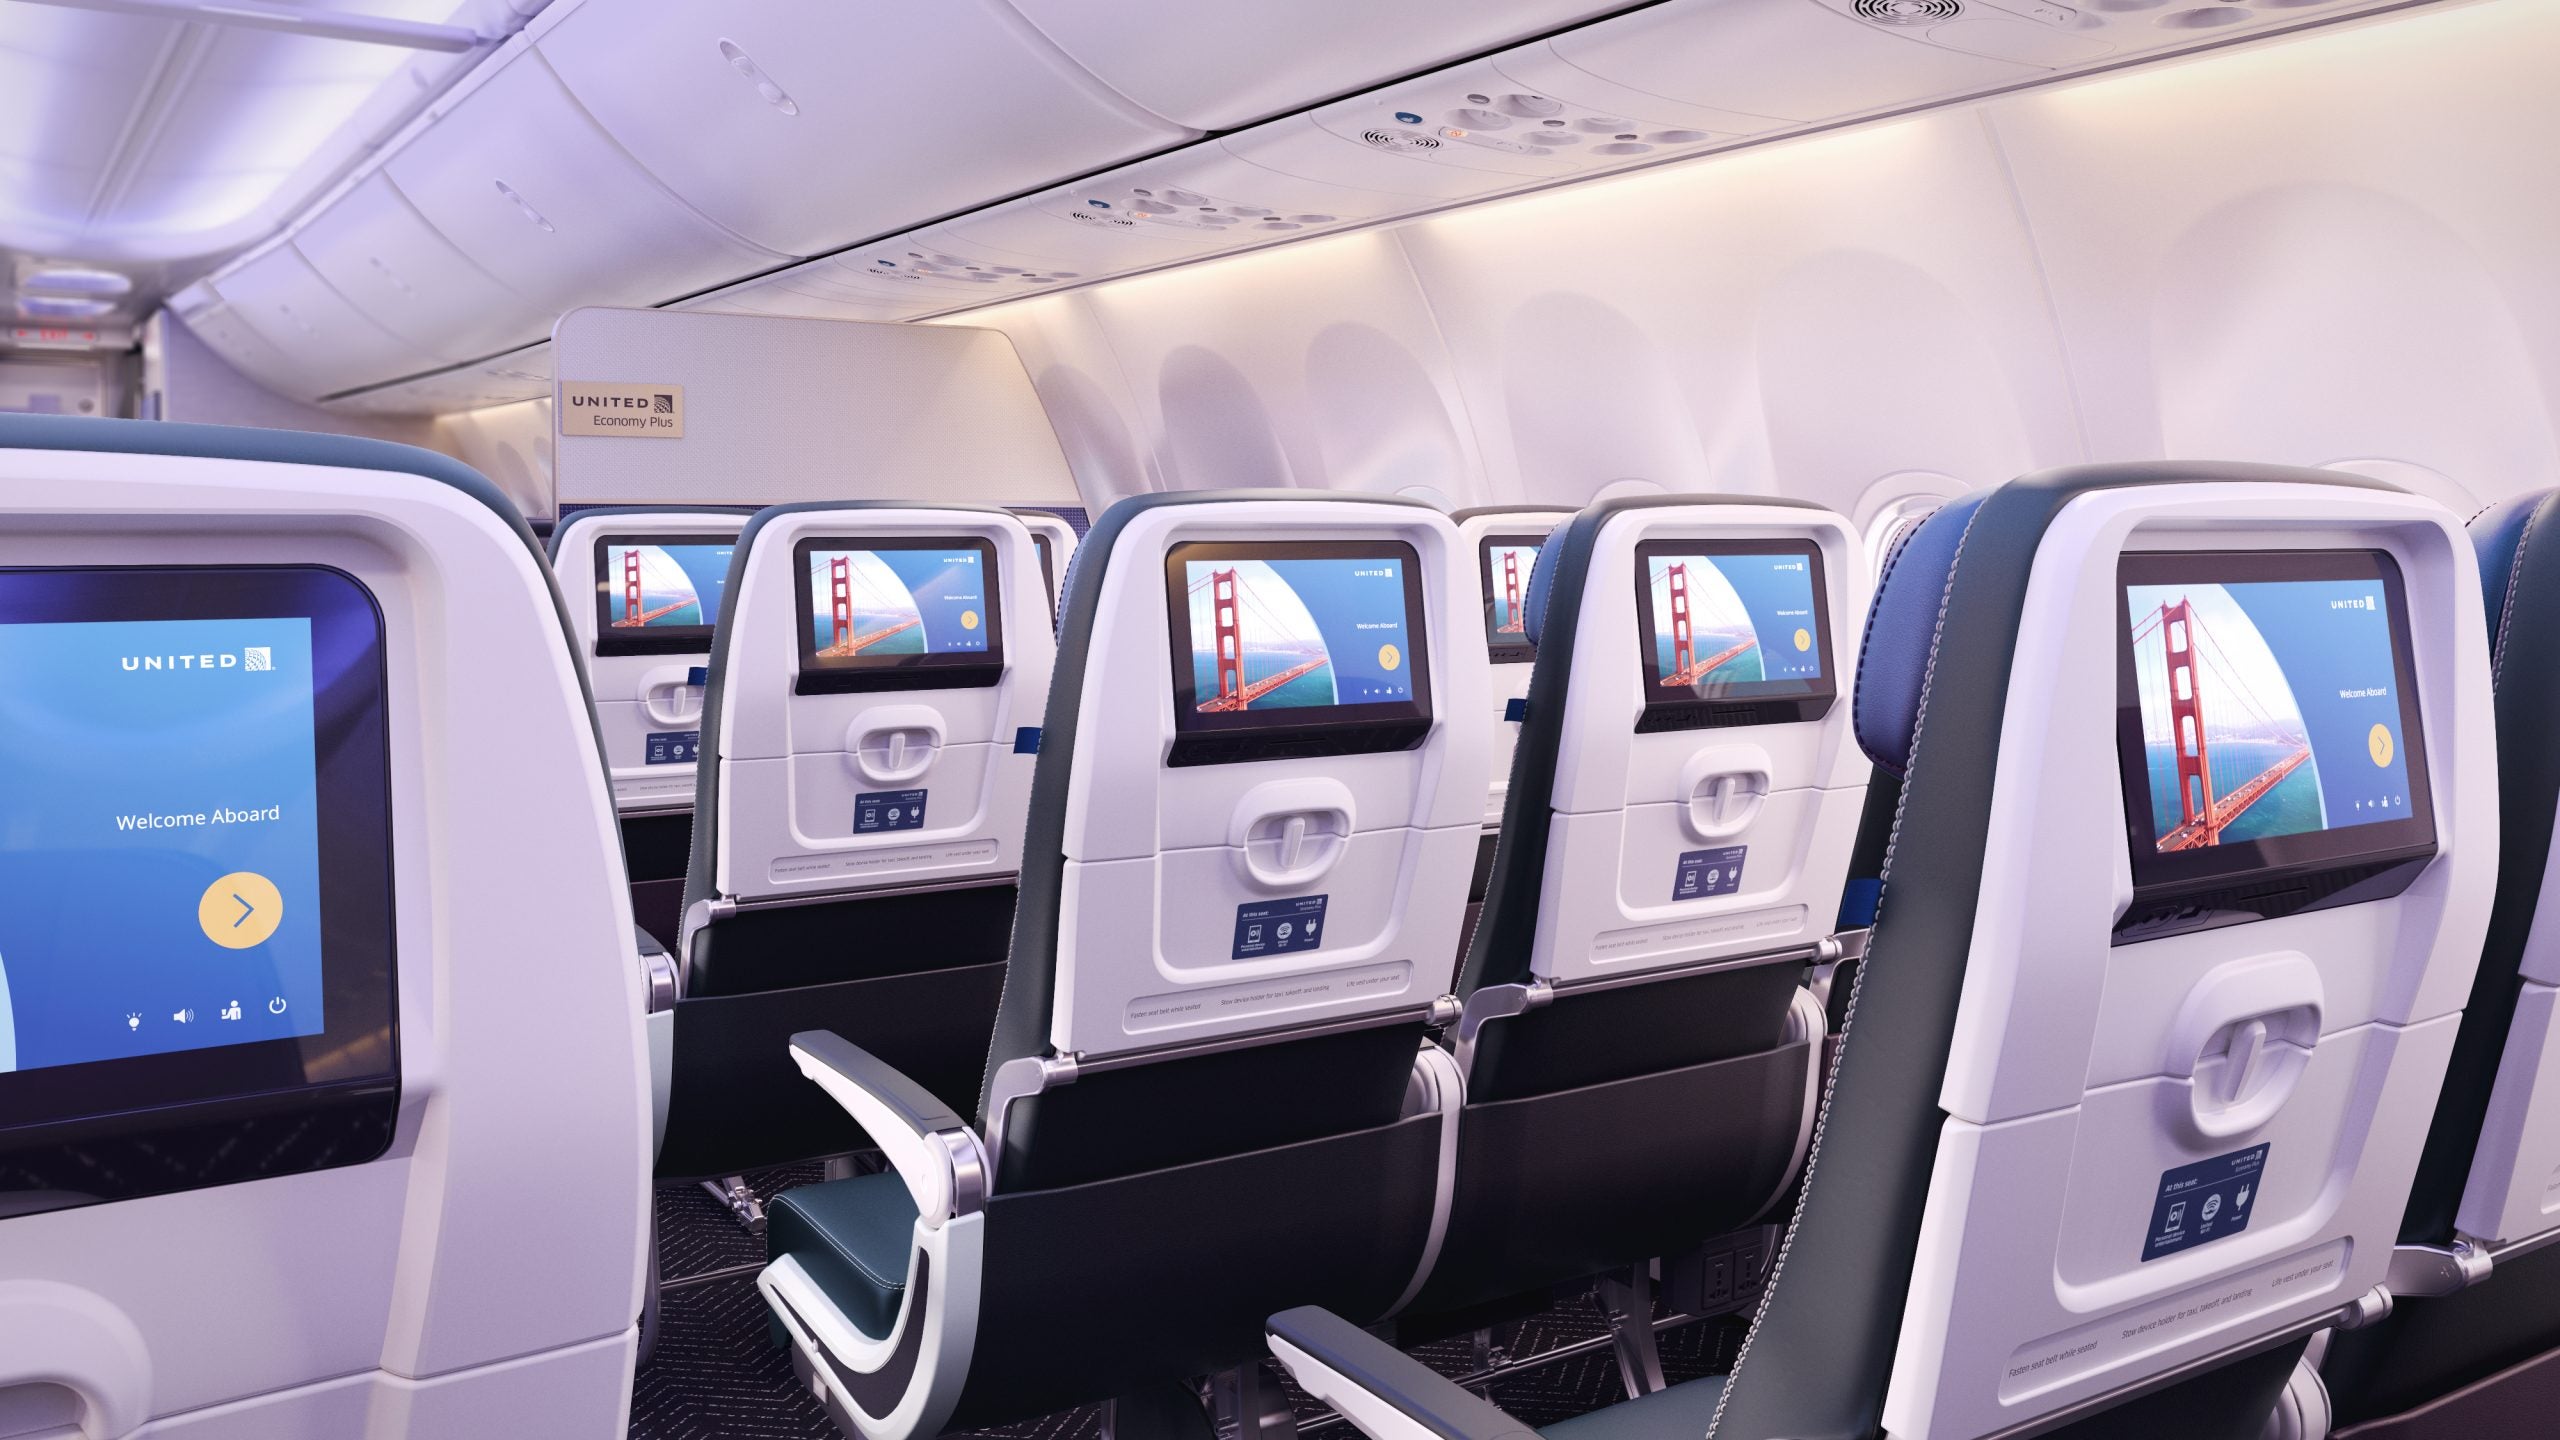 United's new seat-back entertainment screens in a rendering